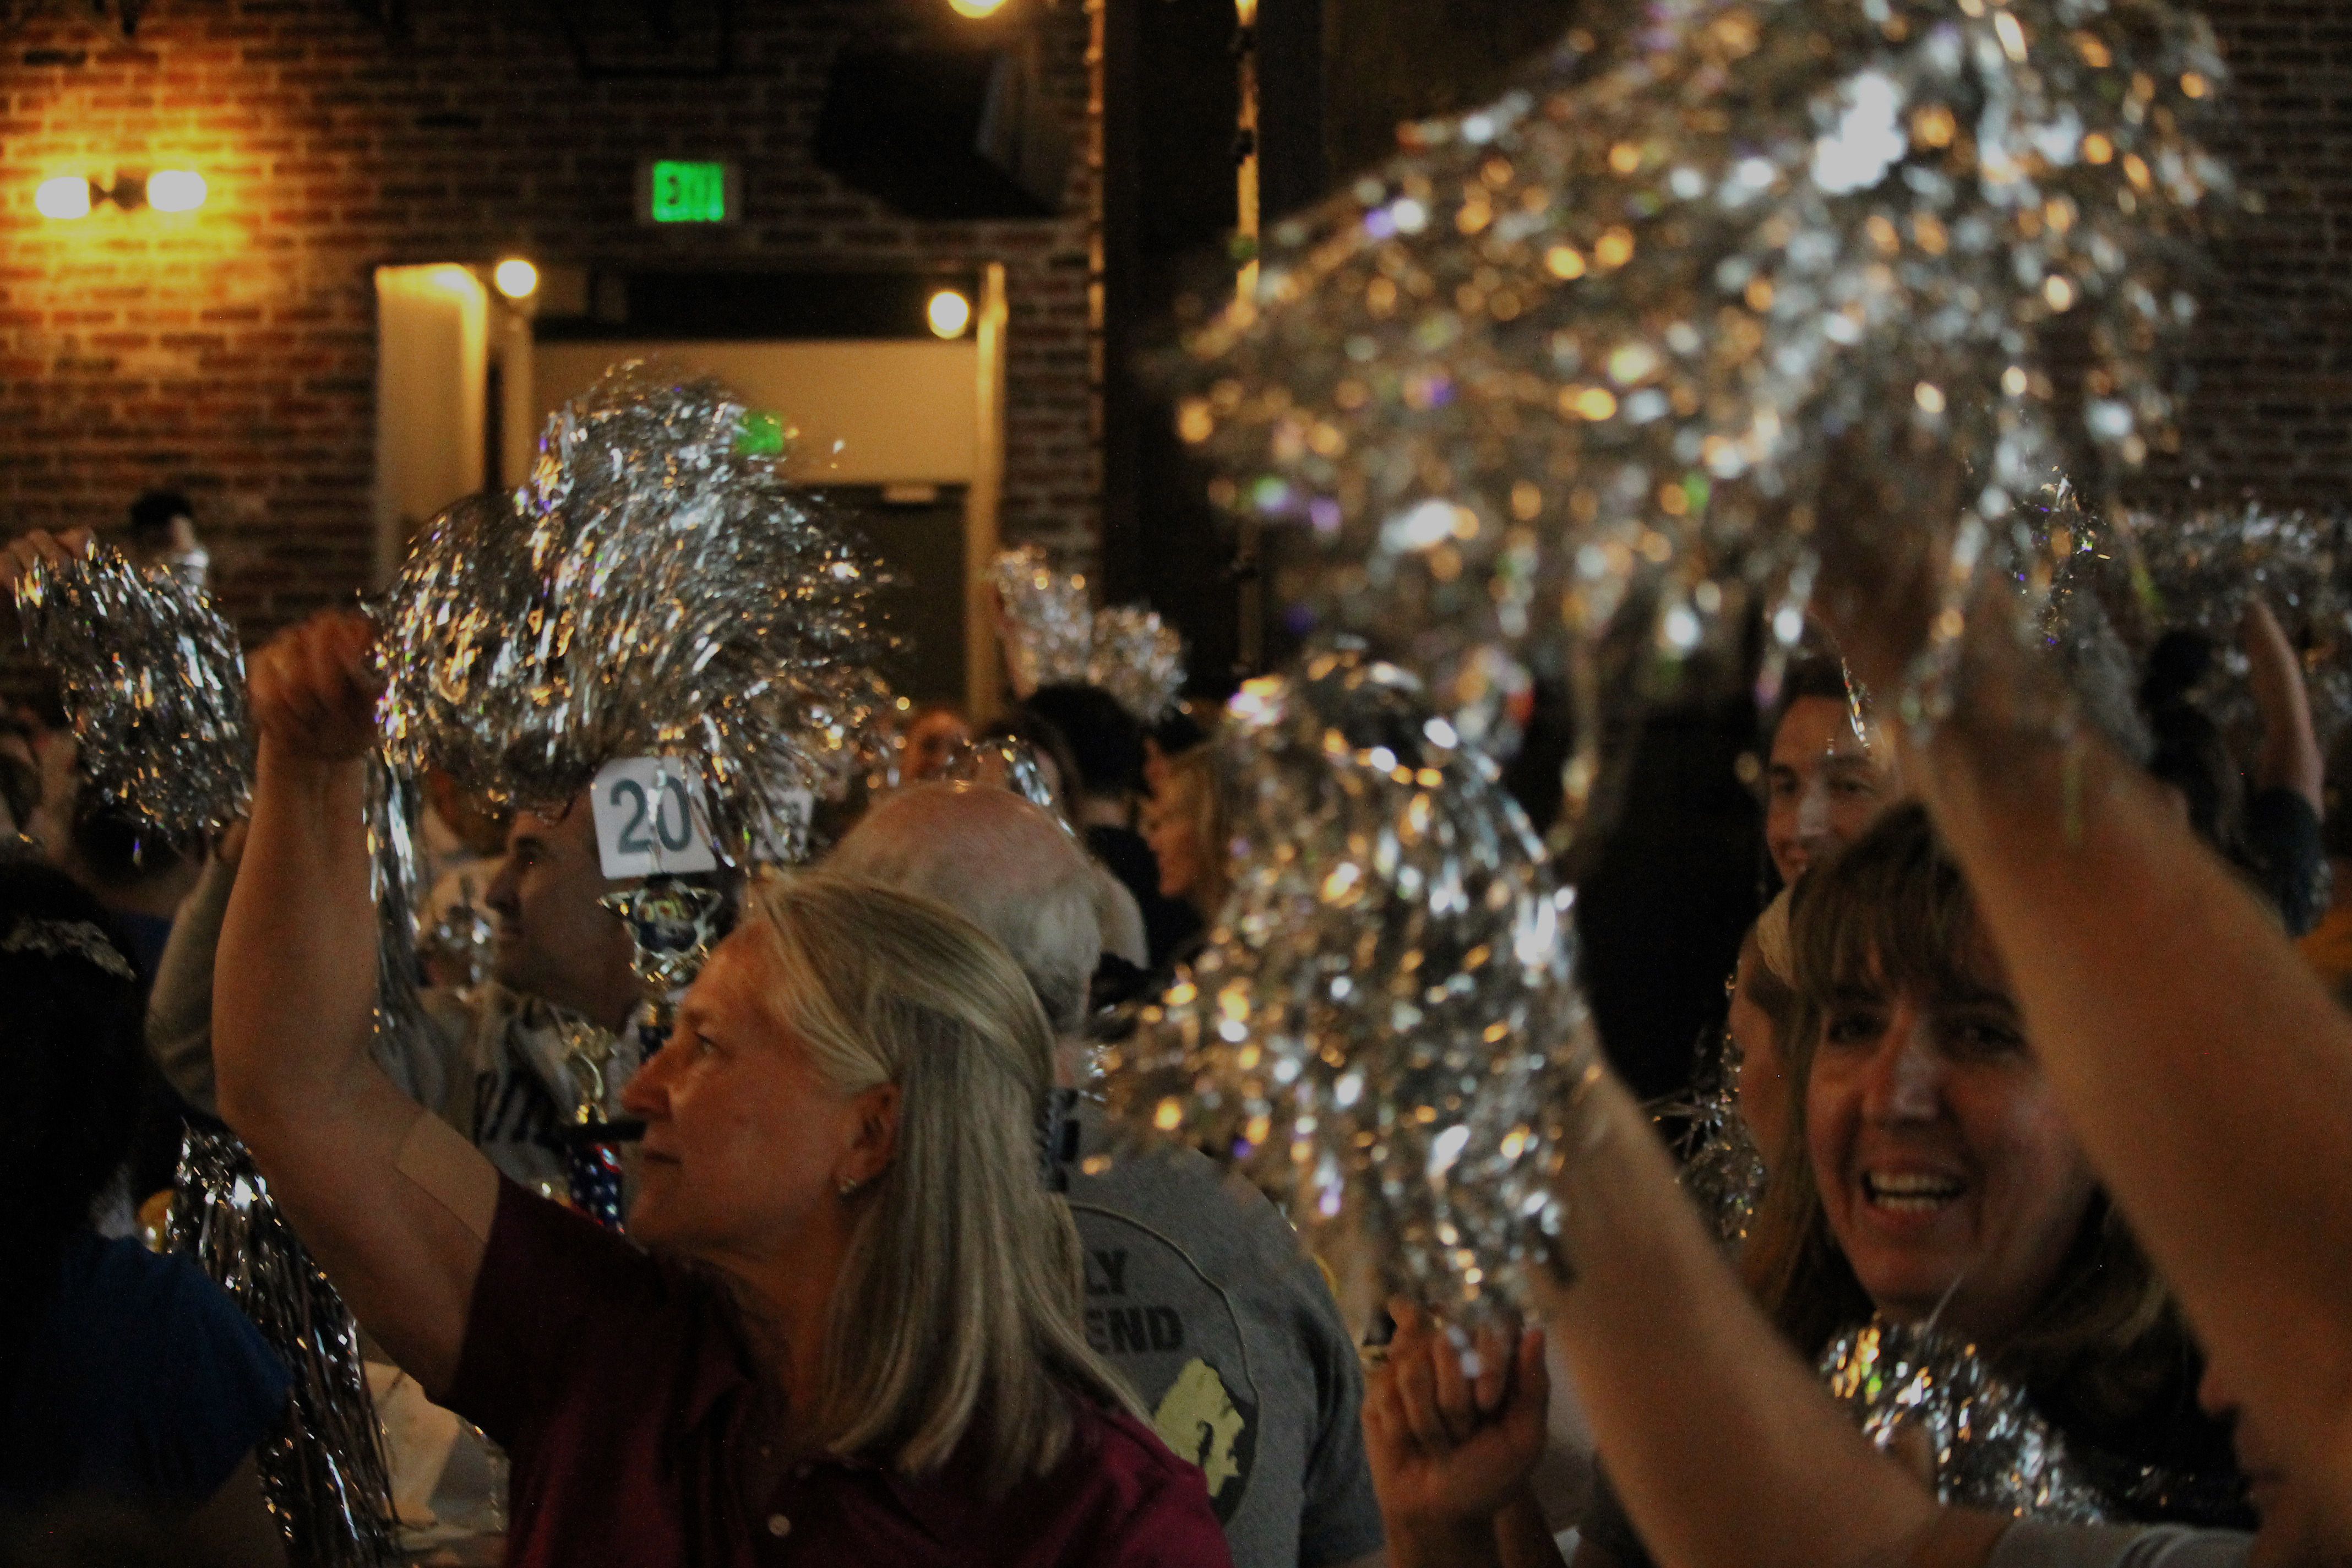 Crowd of people in banquet hall waving silver pom poms